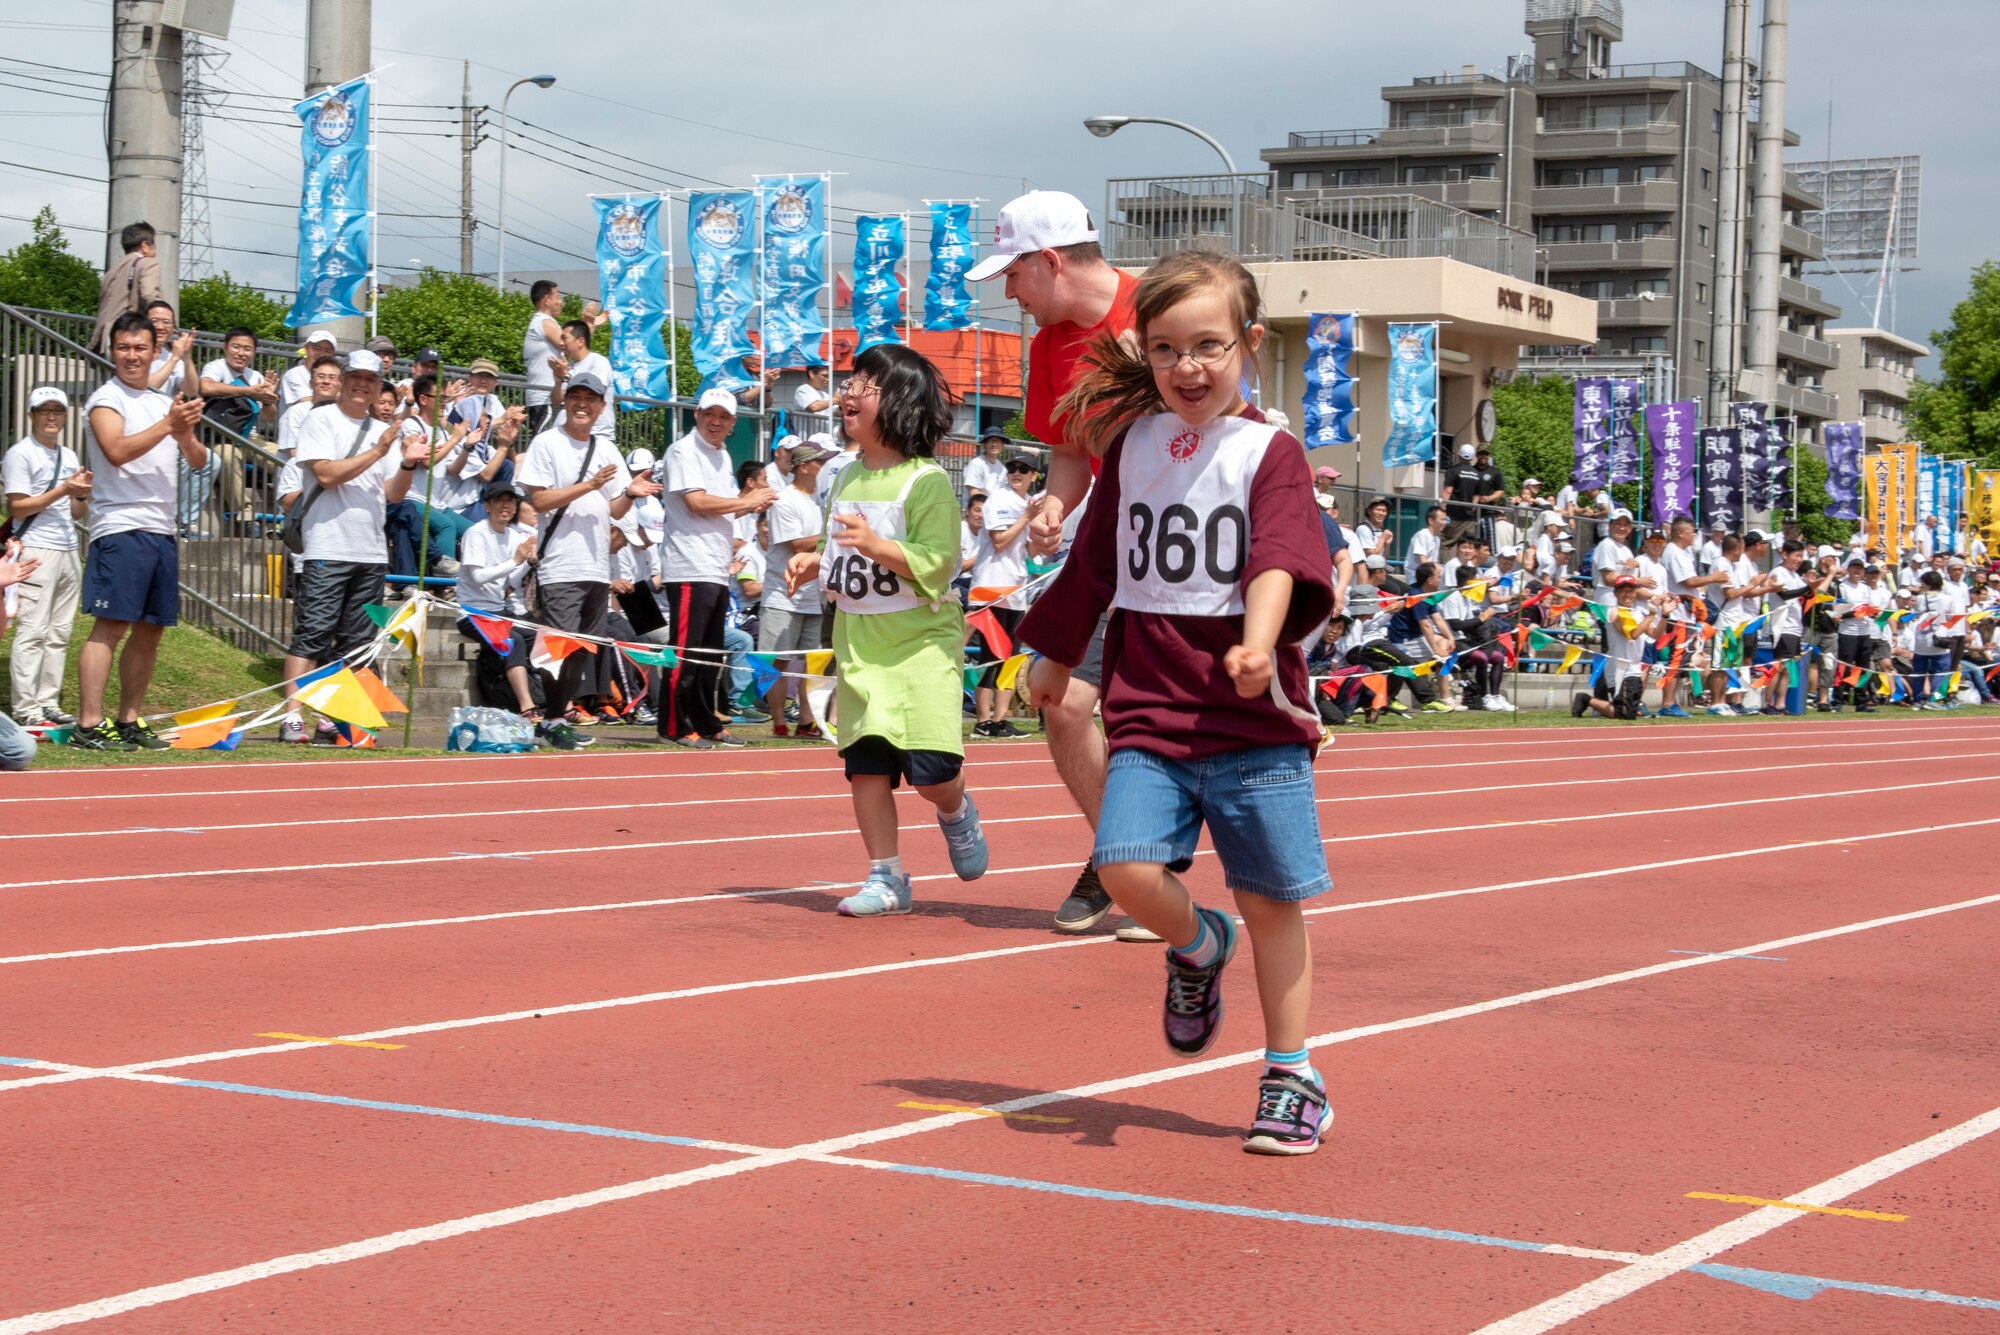 An athlete sprints to the finish line in the 50 meter race during the Kanto Plains Special Olympics at Yokota Air Base, Japan, May 19, 2018.